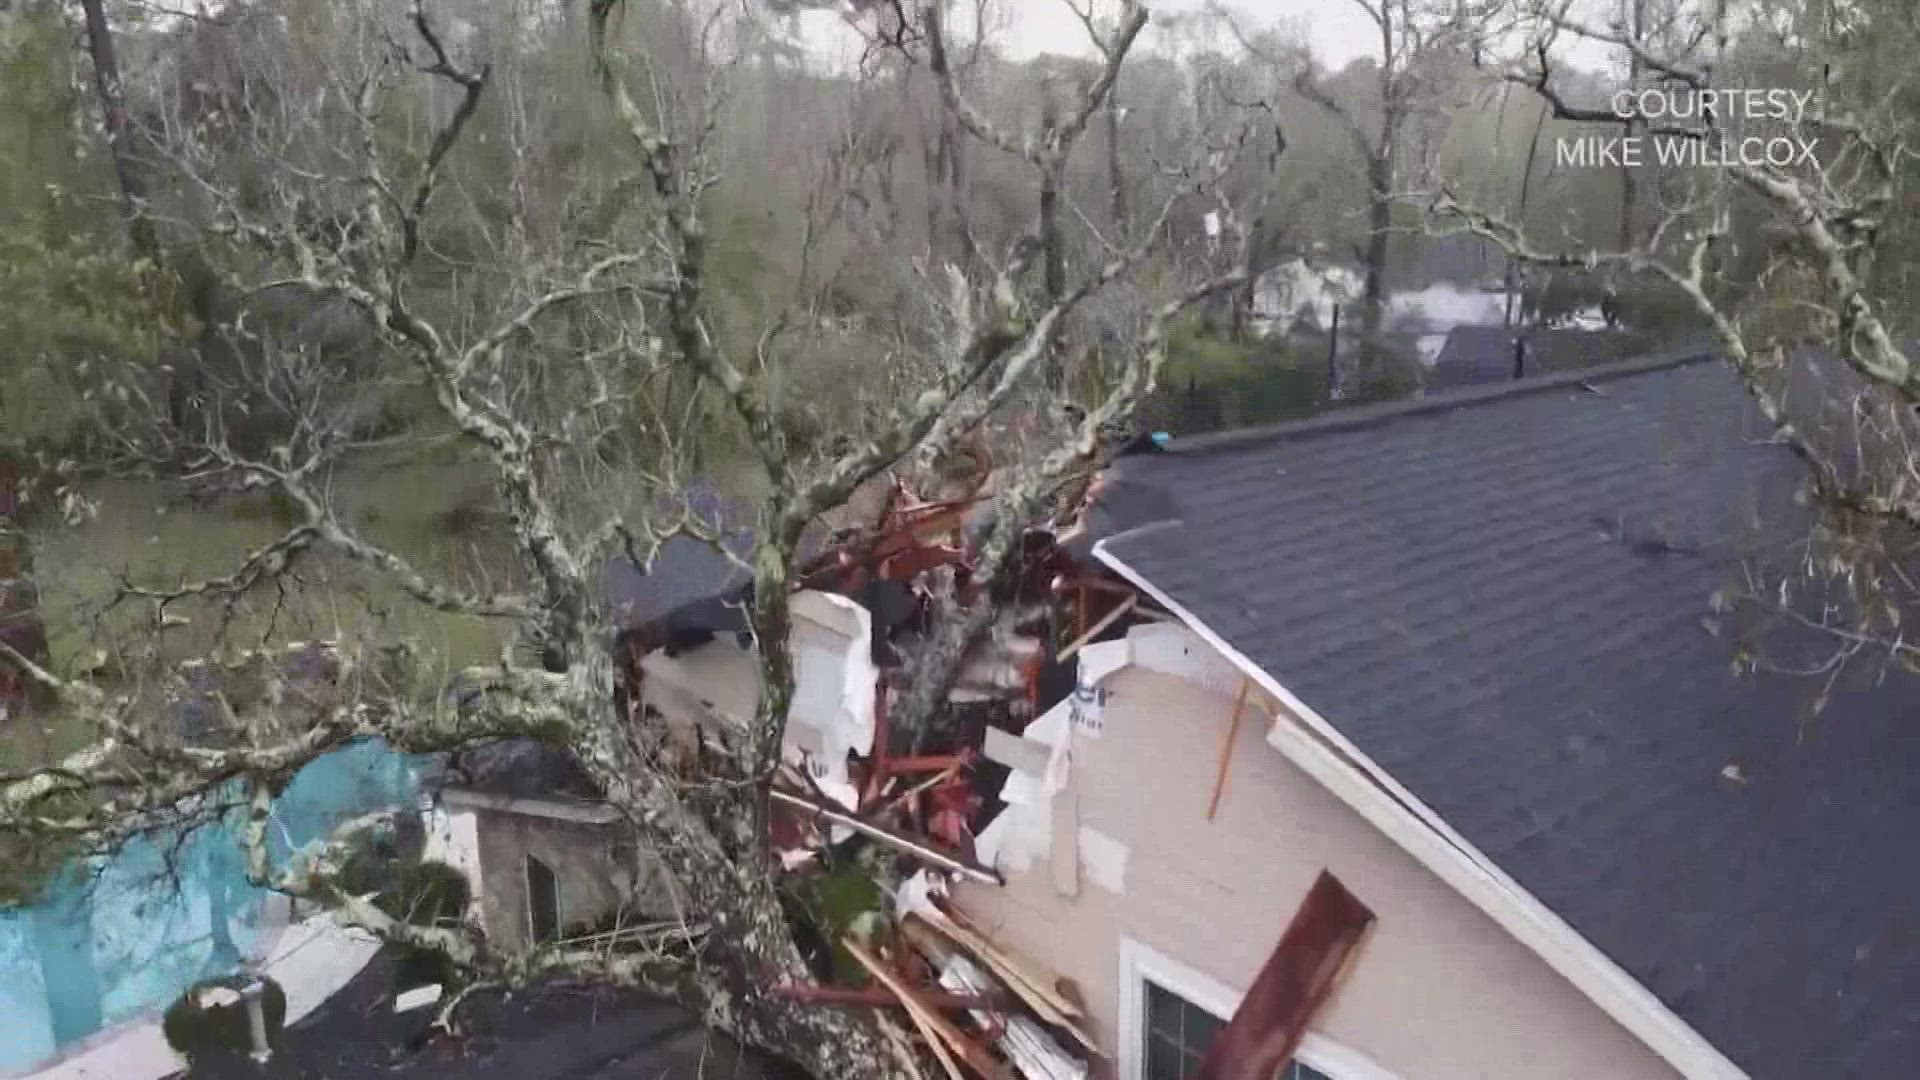 Dozens of Kingwood and Humble residents are still cleaning up their neighborhoods after tornadoes ripped through the Houston area Saturday and early Sunday morning.